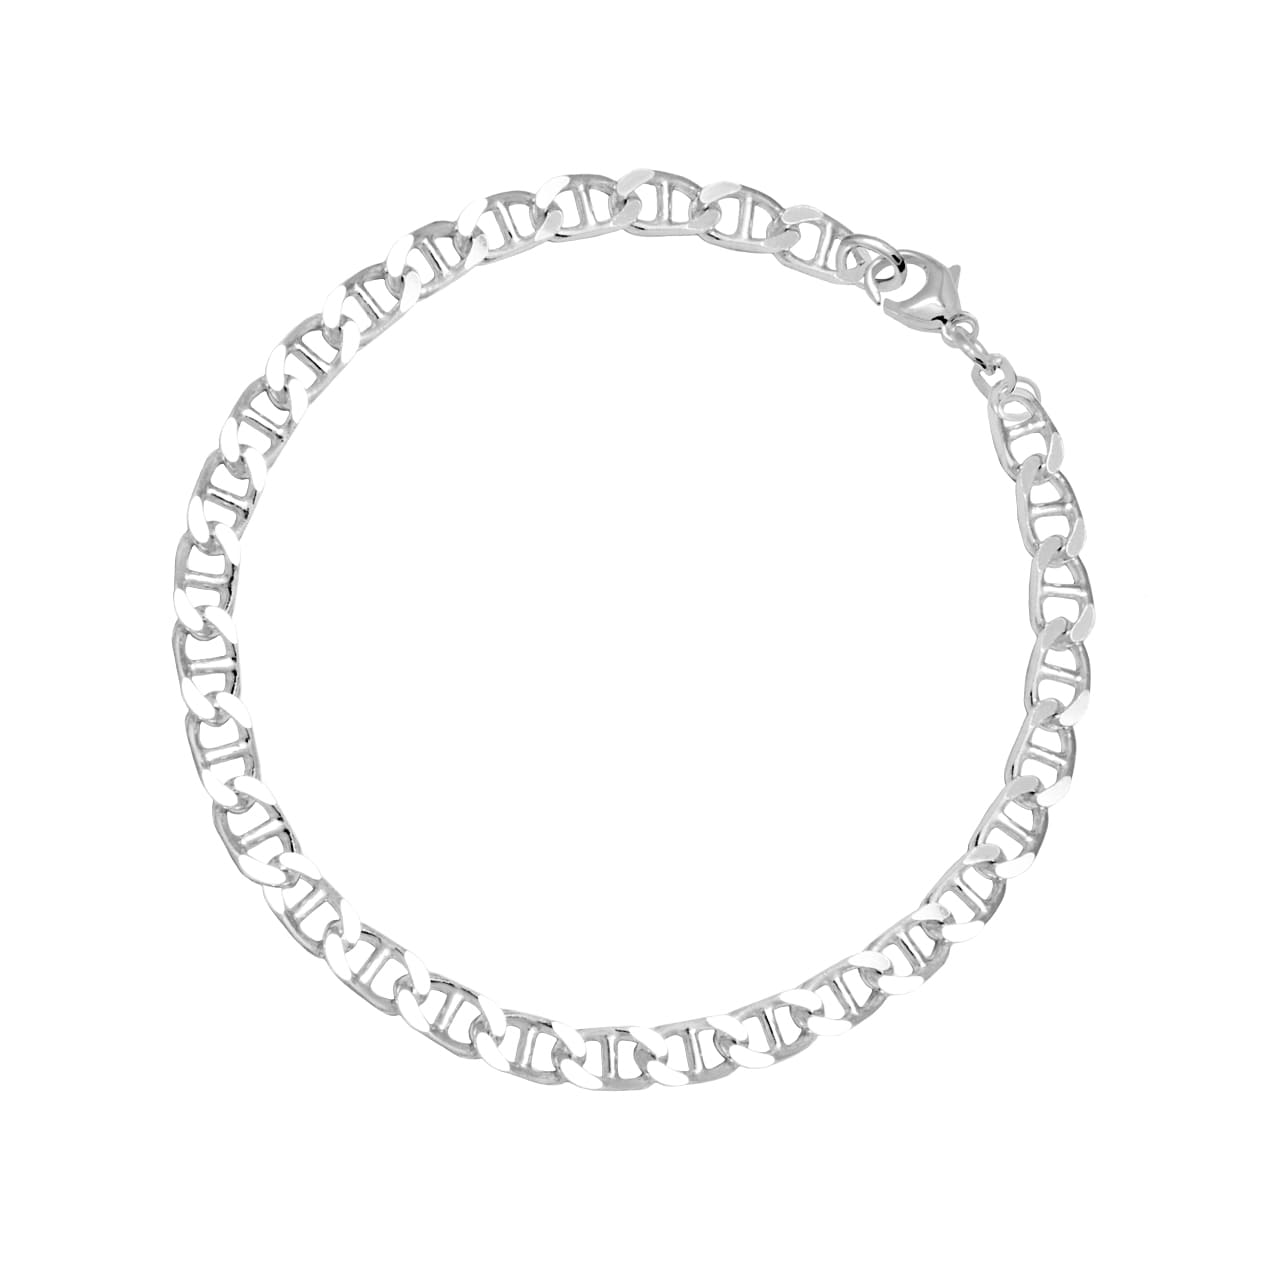 Panzersteg-Armband Ceres L, 925 Sterling Silber